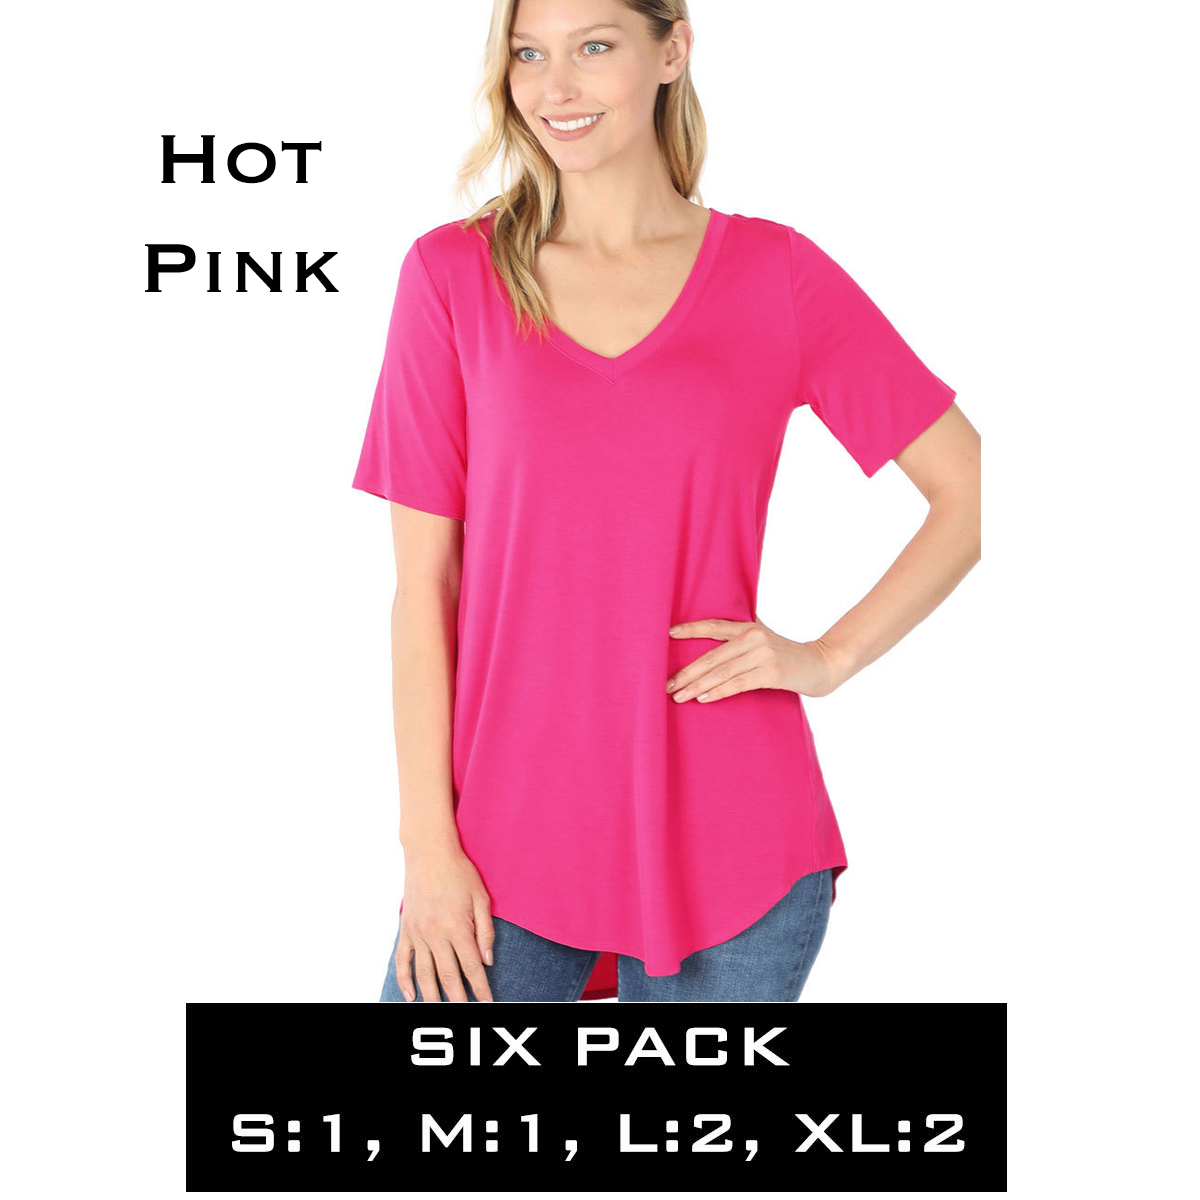 5541 - Hot Pink - Six Pack